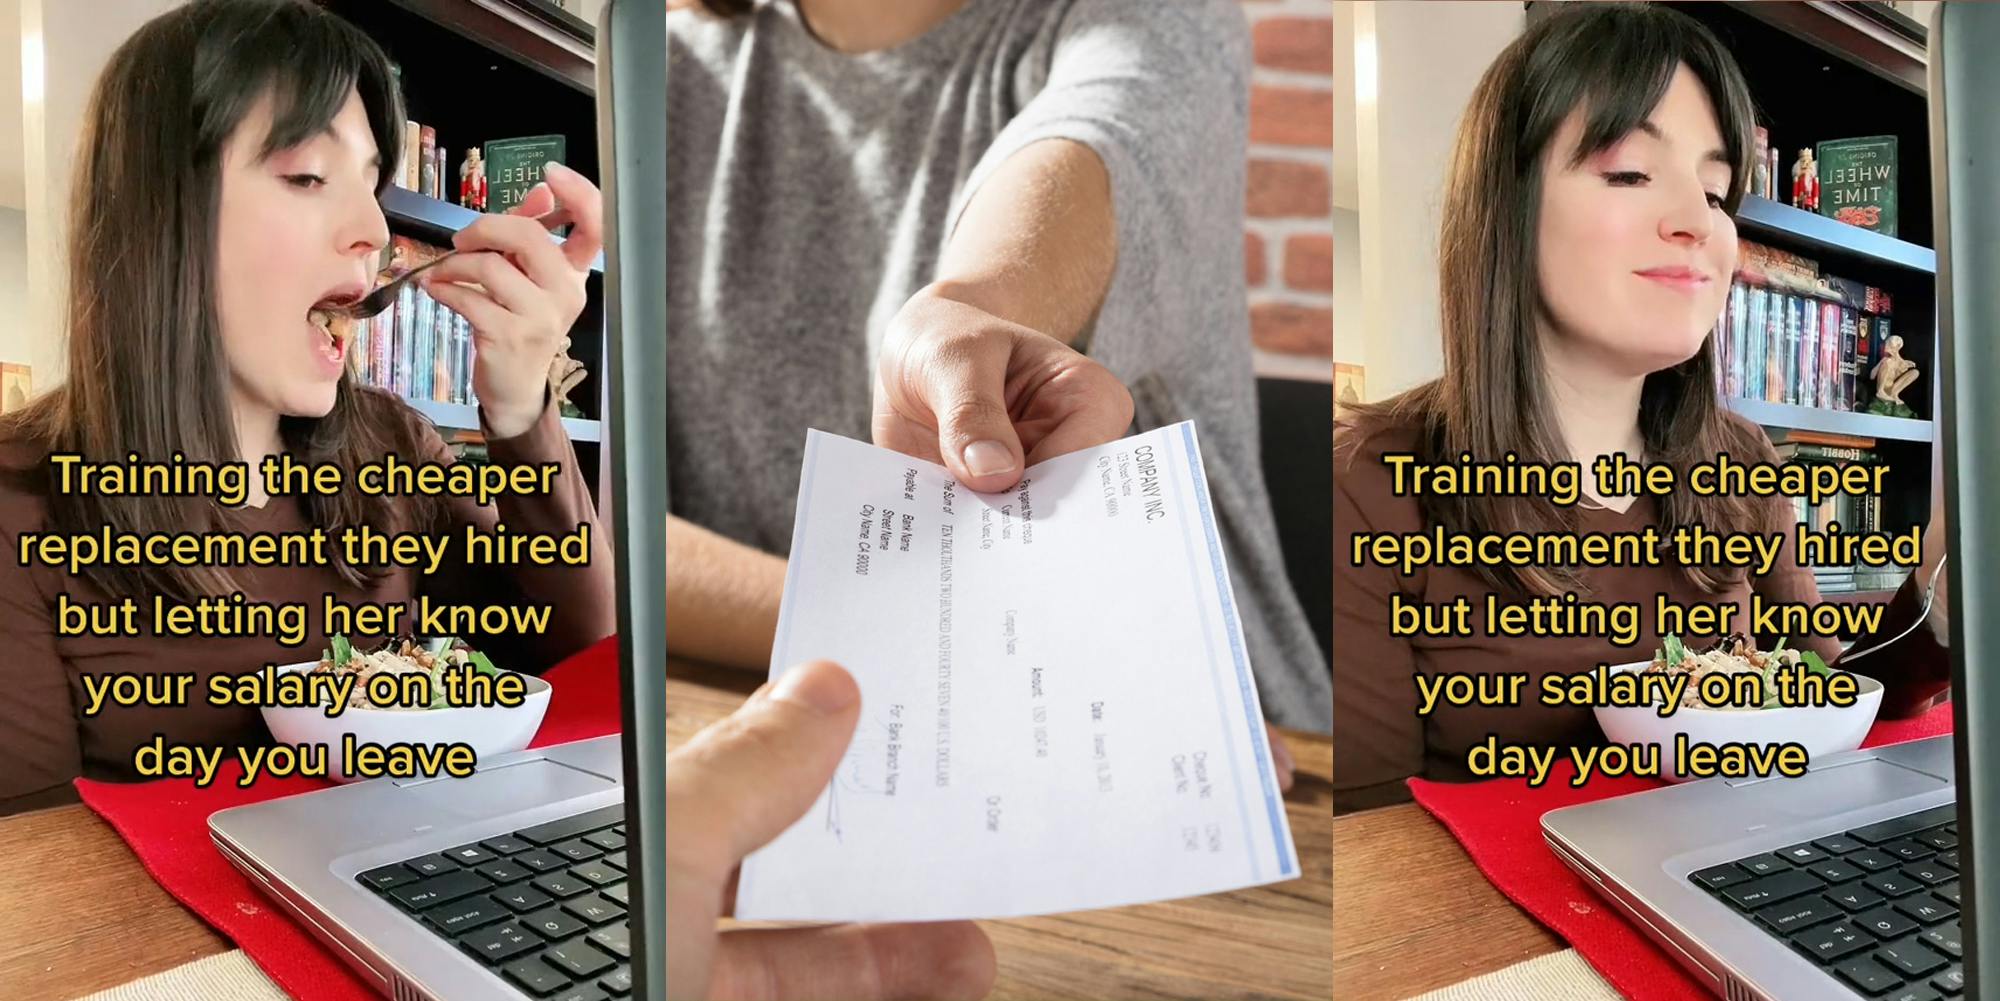 woman eating at laptop caption "Training the cheaper replacement they hired but letting her know the salary on the first day you leave" (l) person handing salary check (c) woman eating at laptop caption "Training the cheaper replacement they hired but letting her know the salary on the first day you leave" (r)